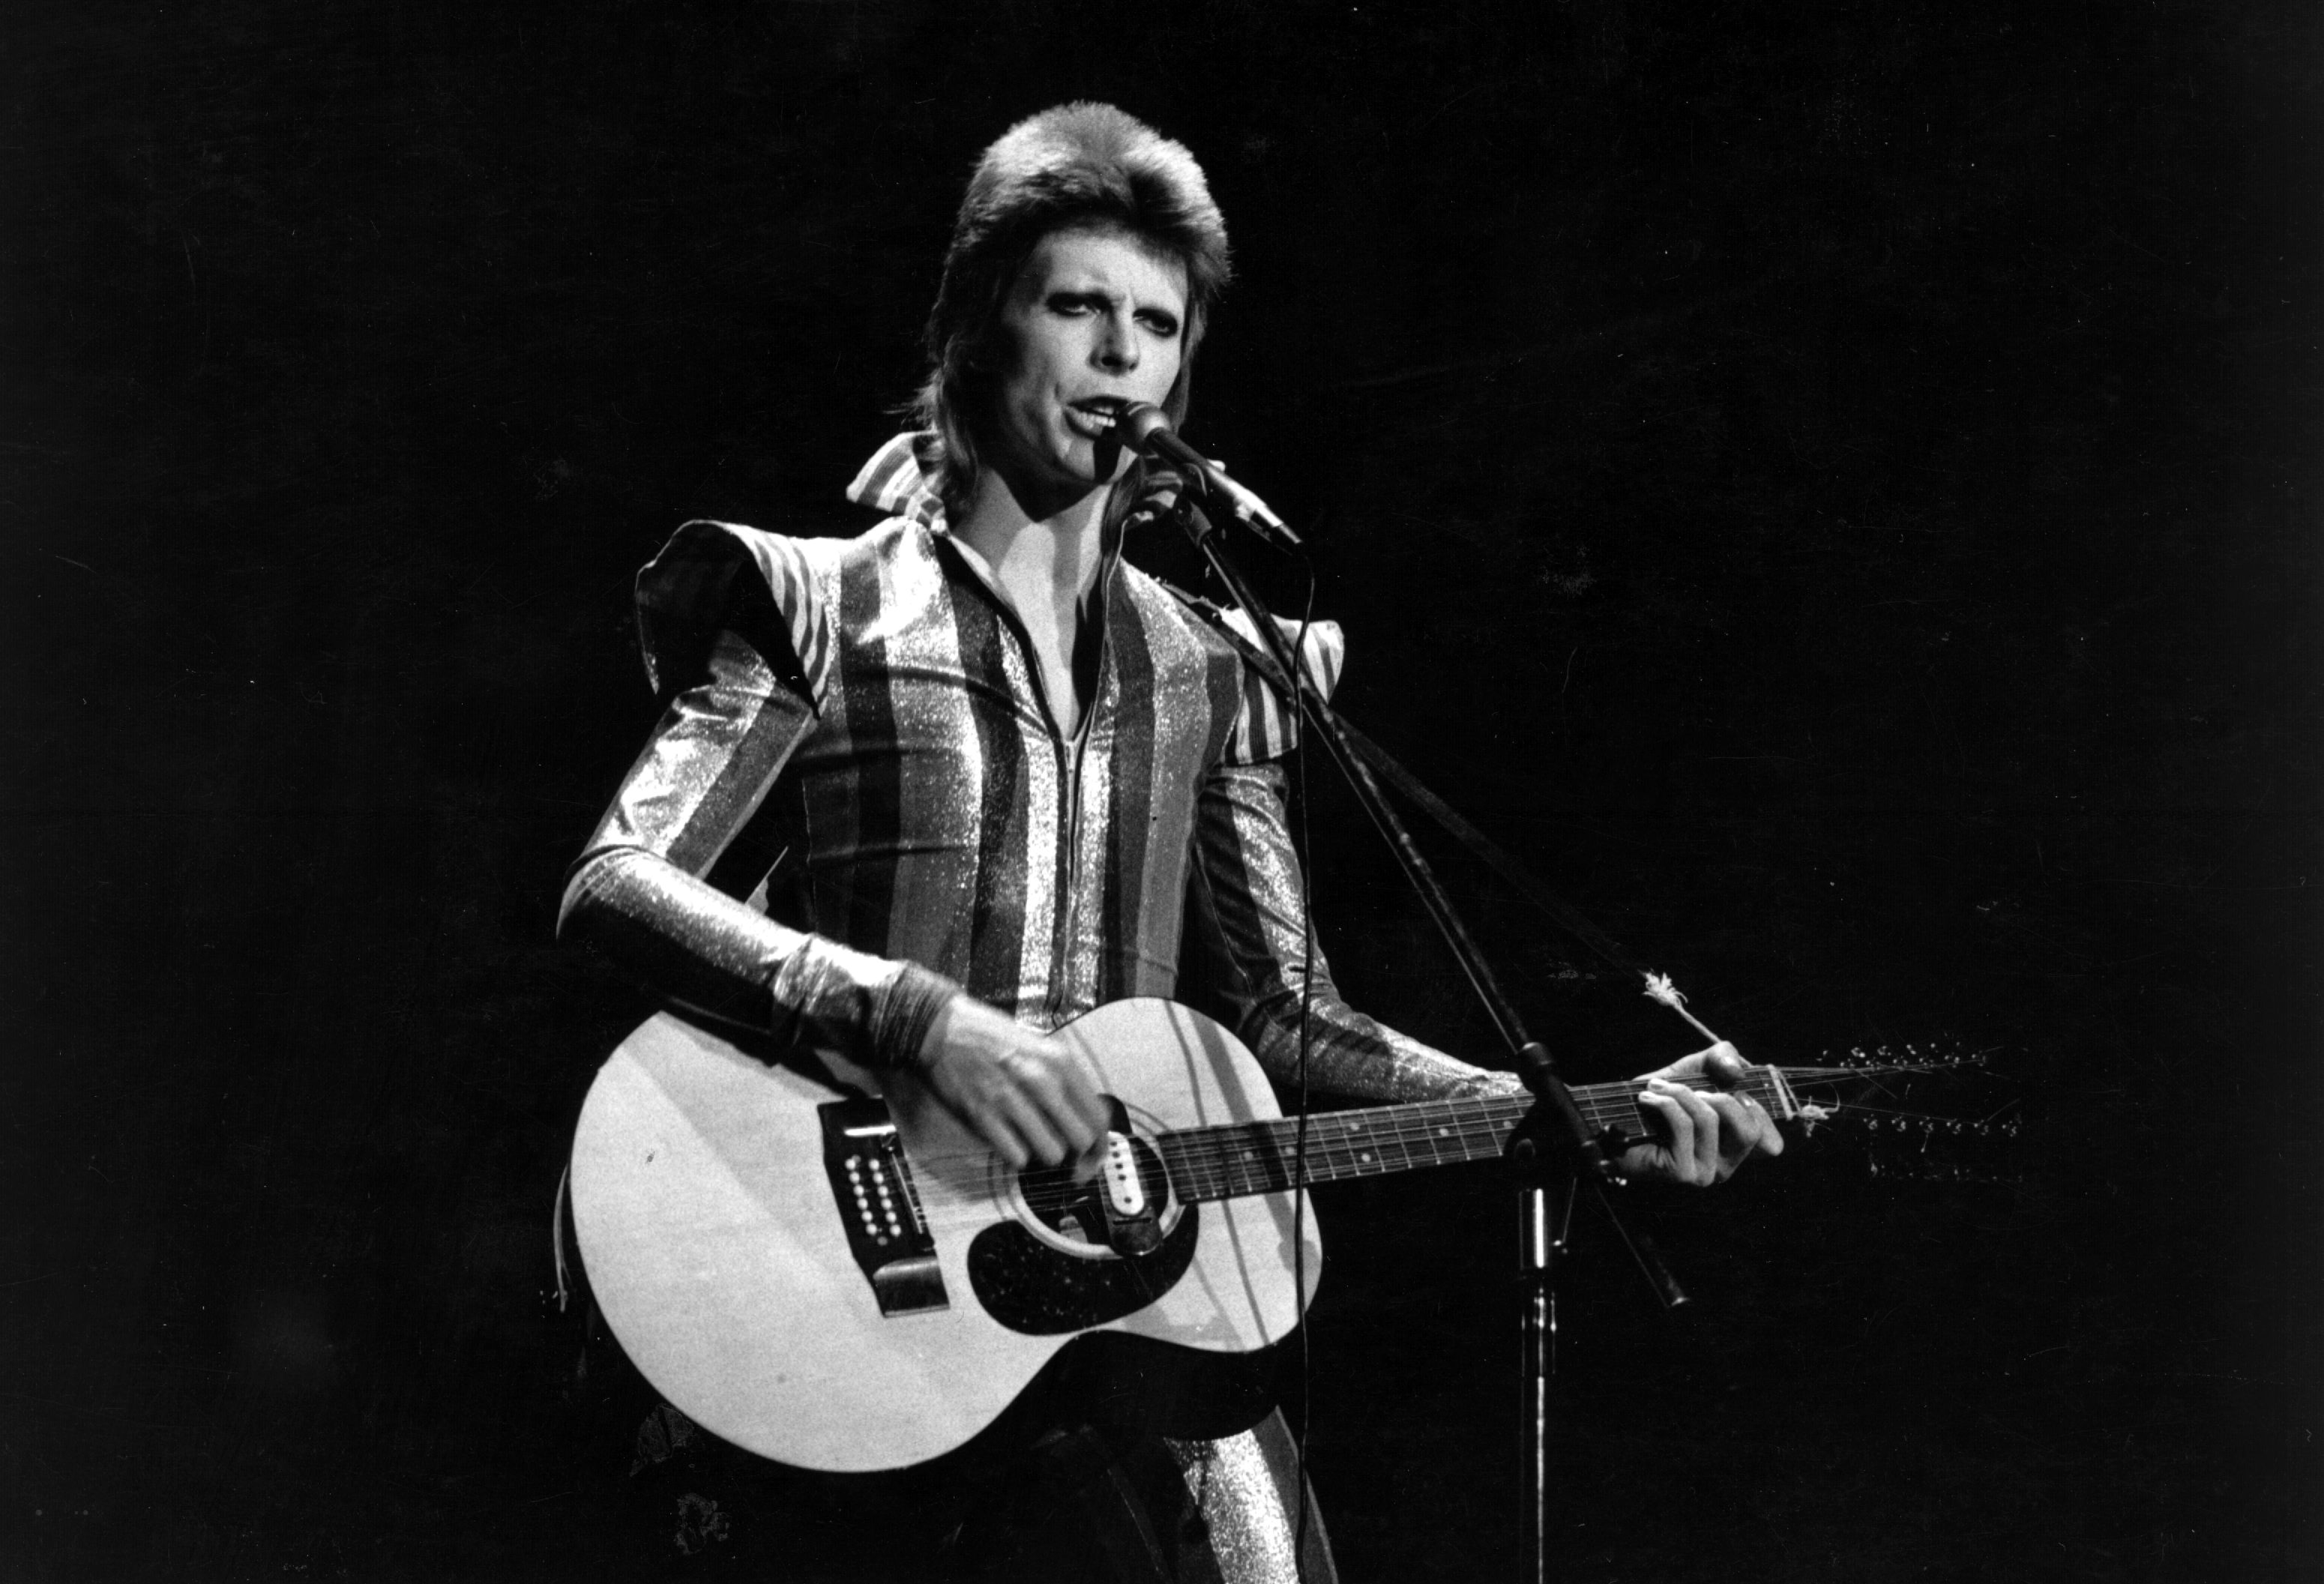 David Bowie dressed as Ziggy Stardust and holding a guitar